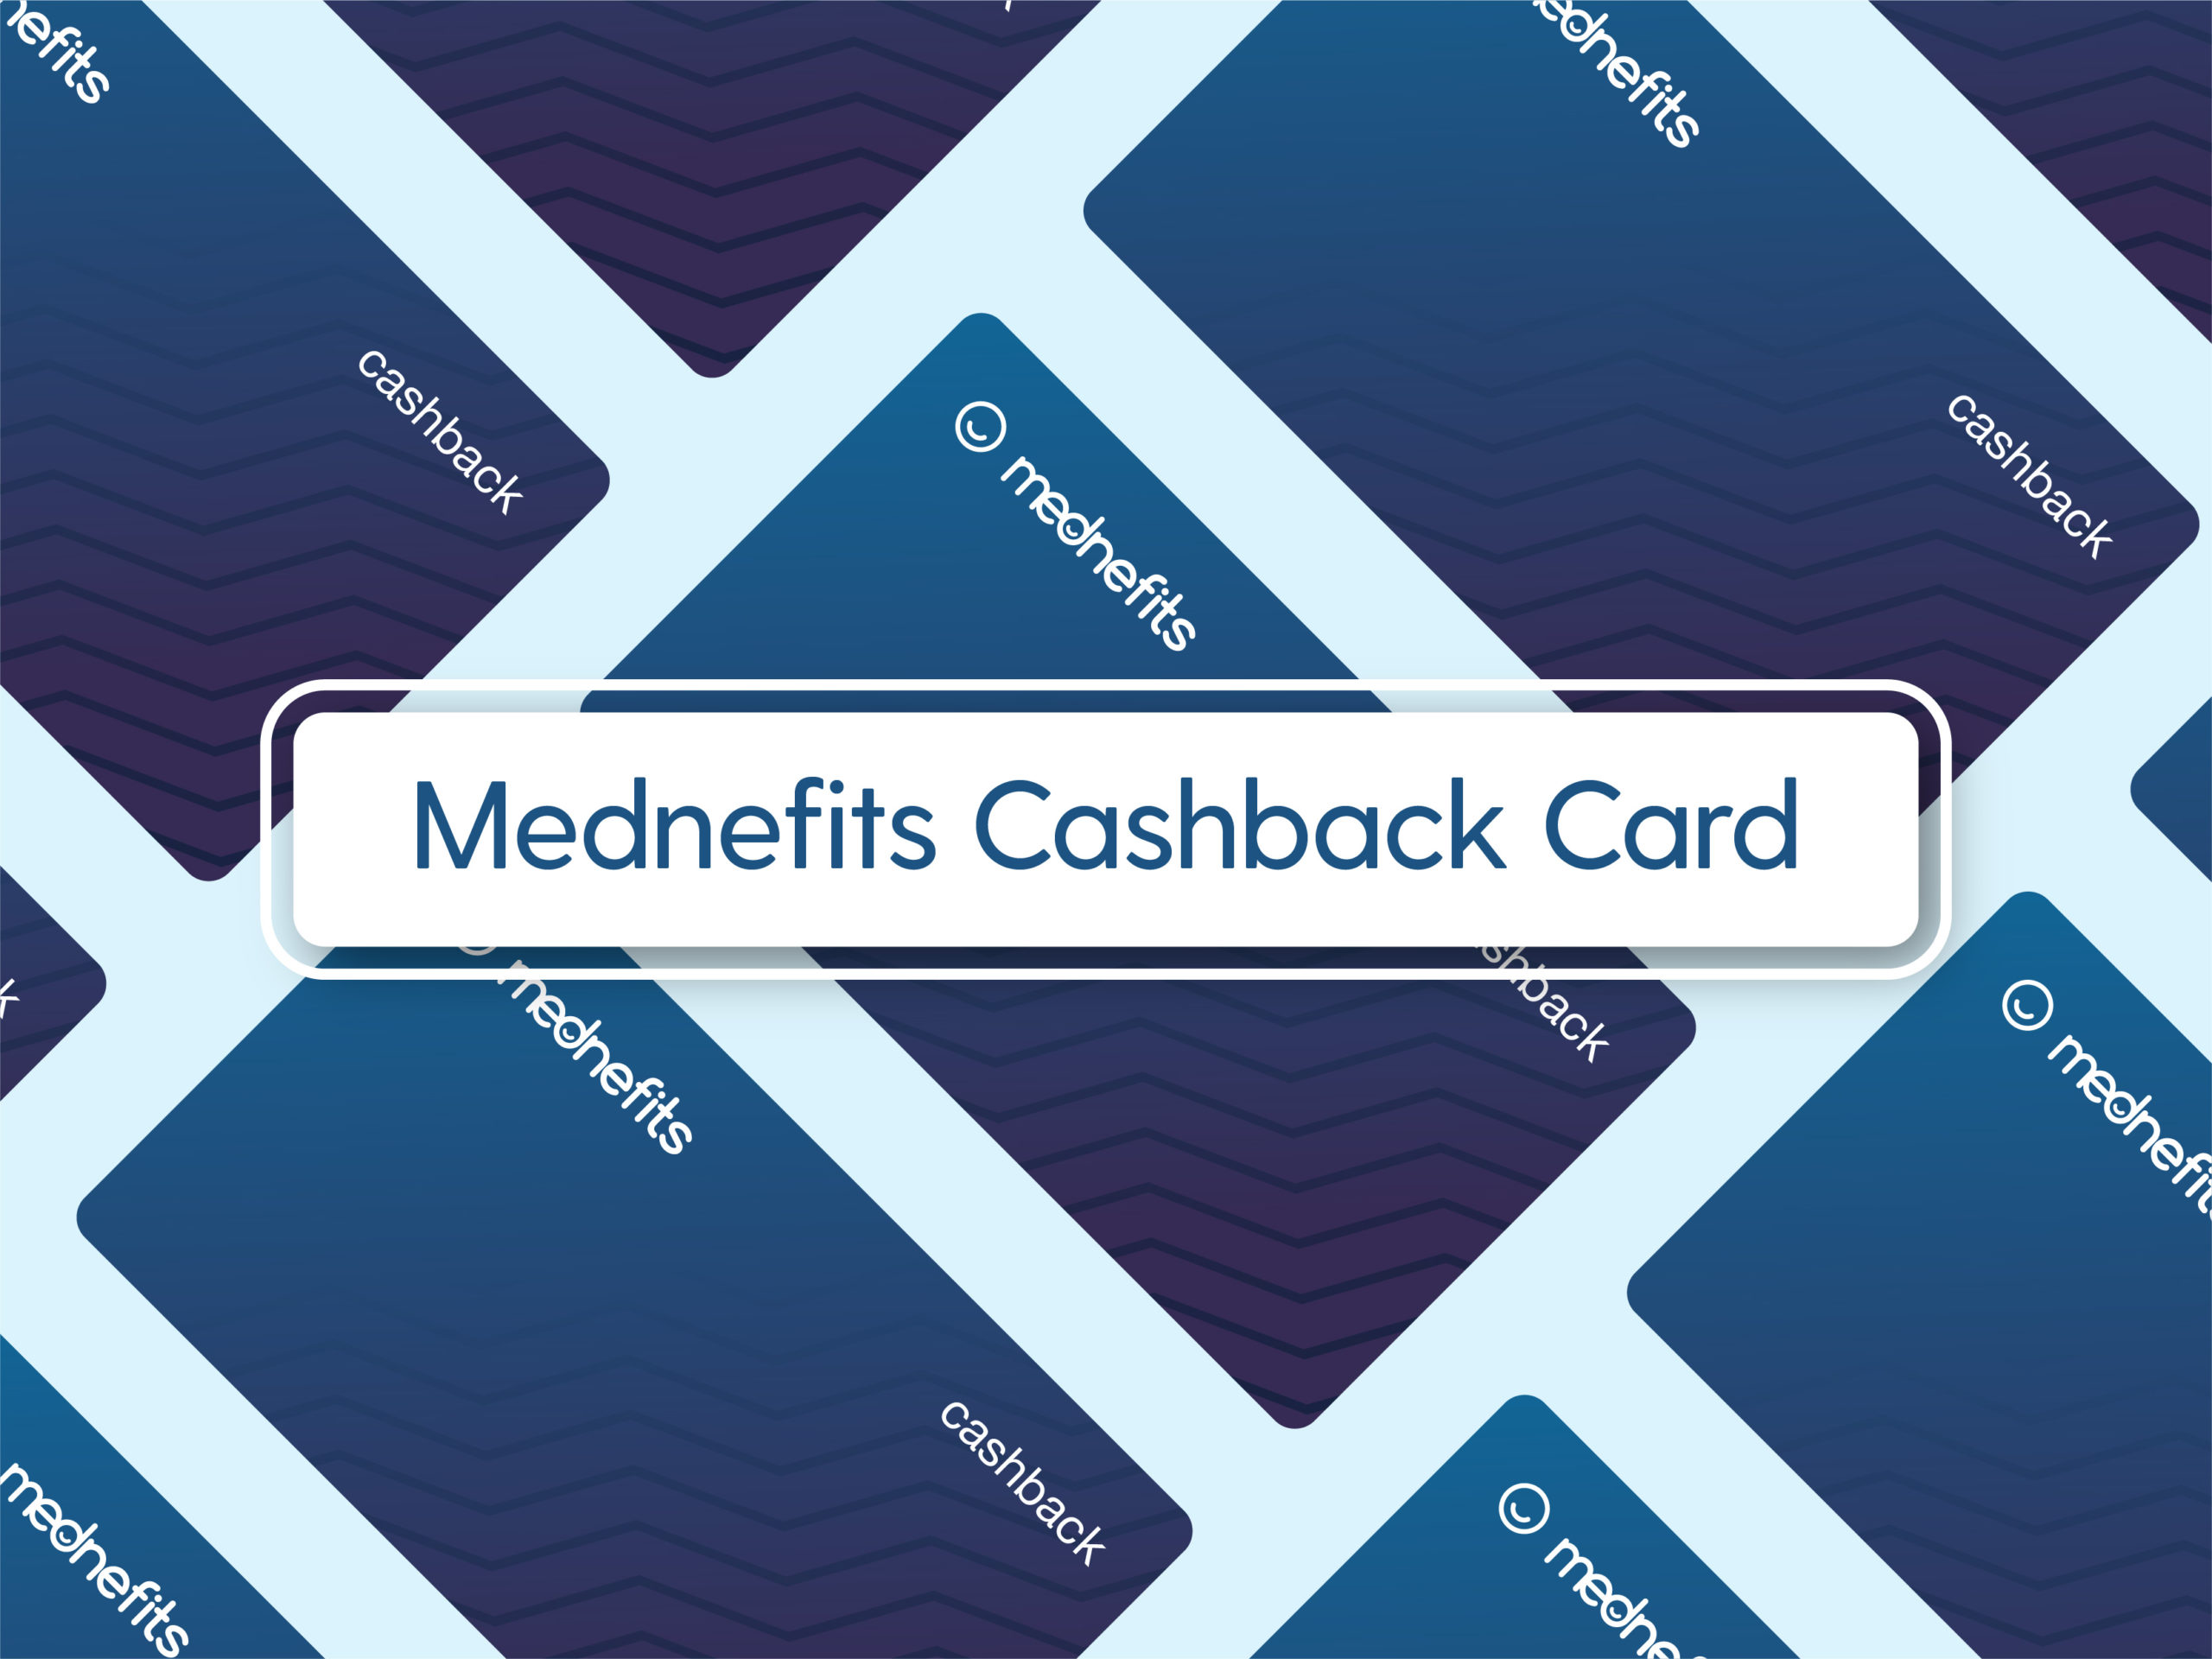 Corporate benefits just got more exciting: Introducing Mednefits Cards